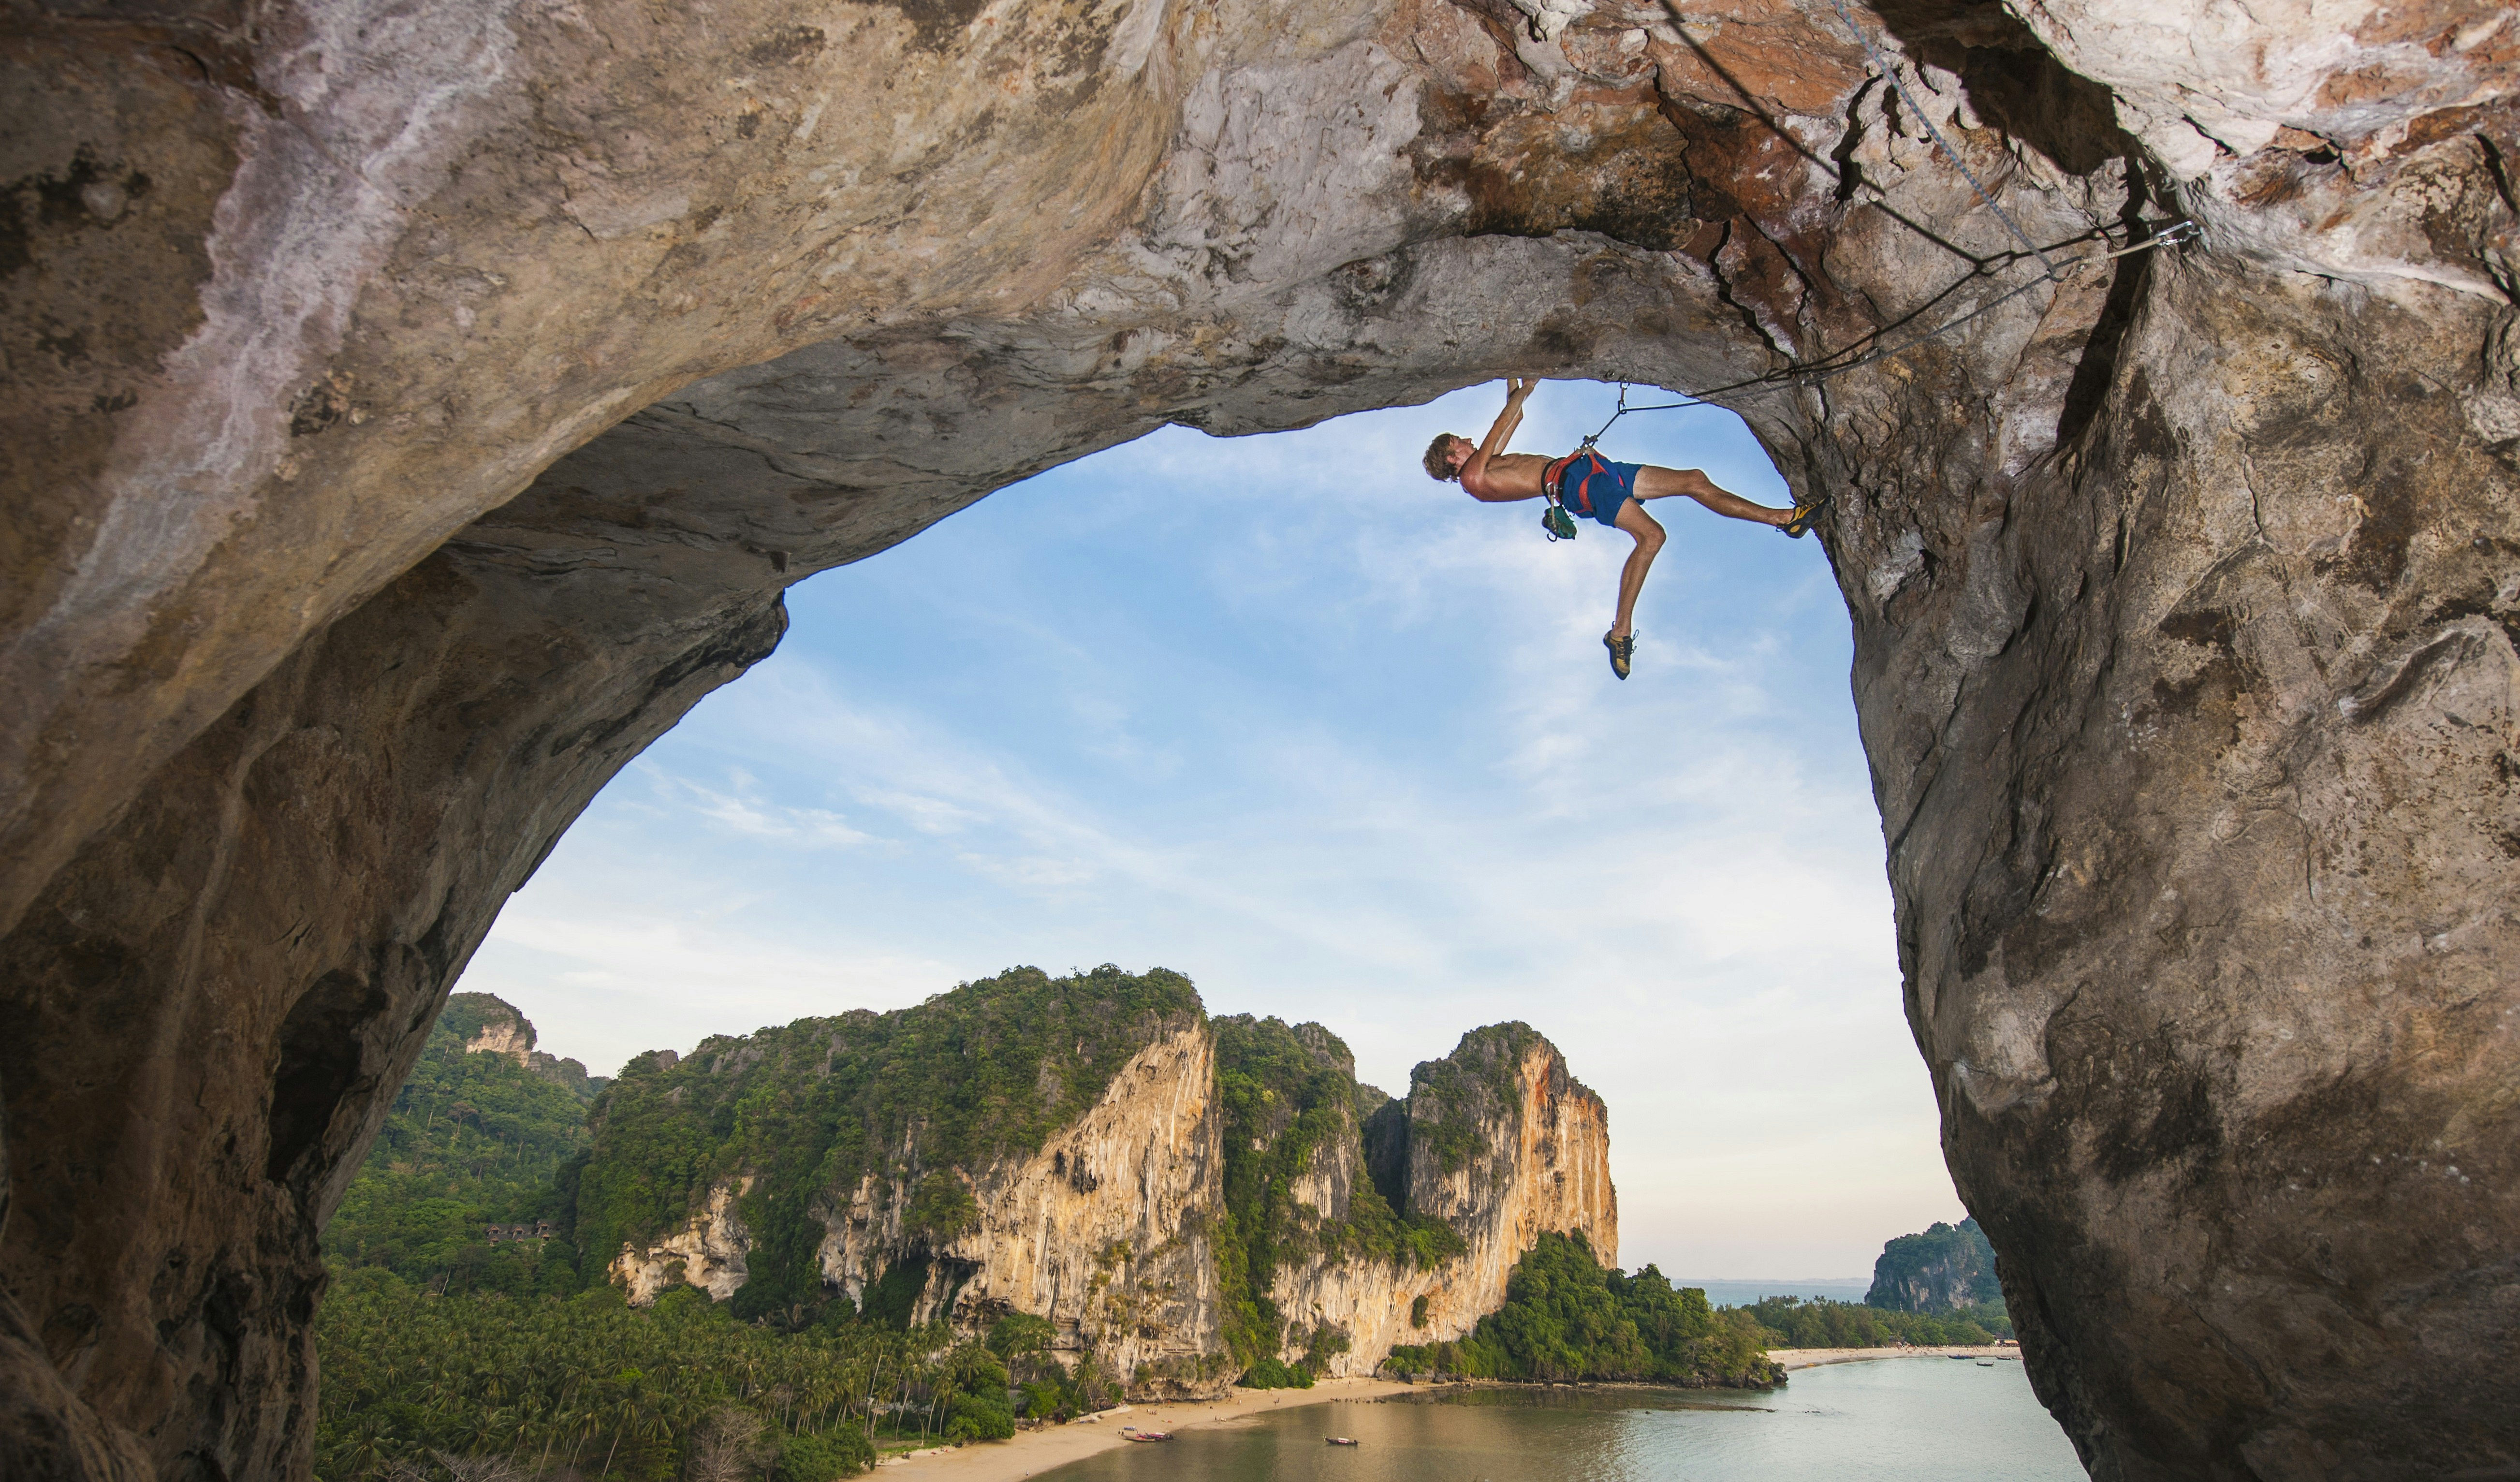 A climber dangles from an arching rock formation in Krabi province in Thailand. In the background large sea cliffs are visible, plus a strip of golden white sand.